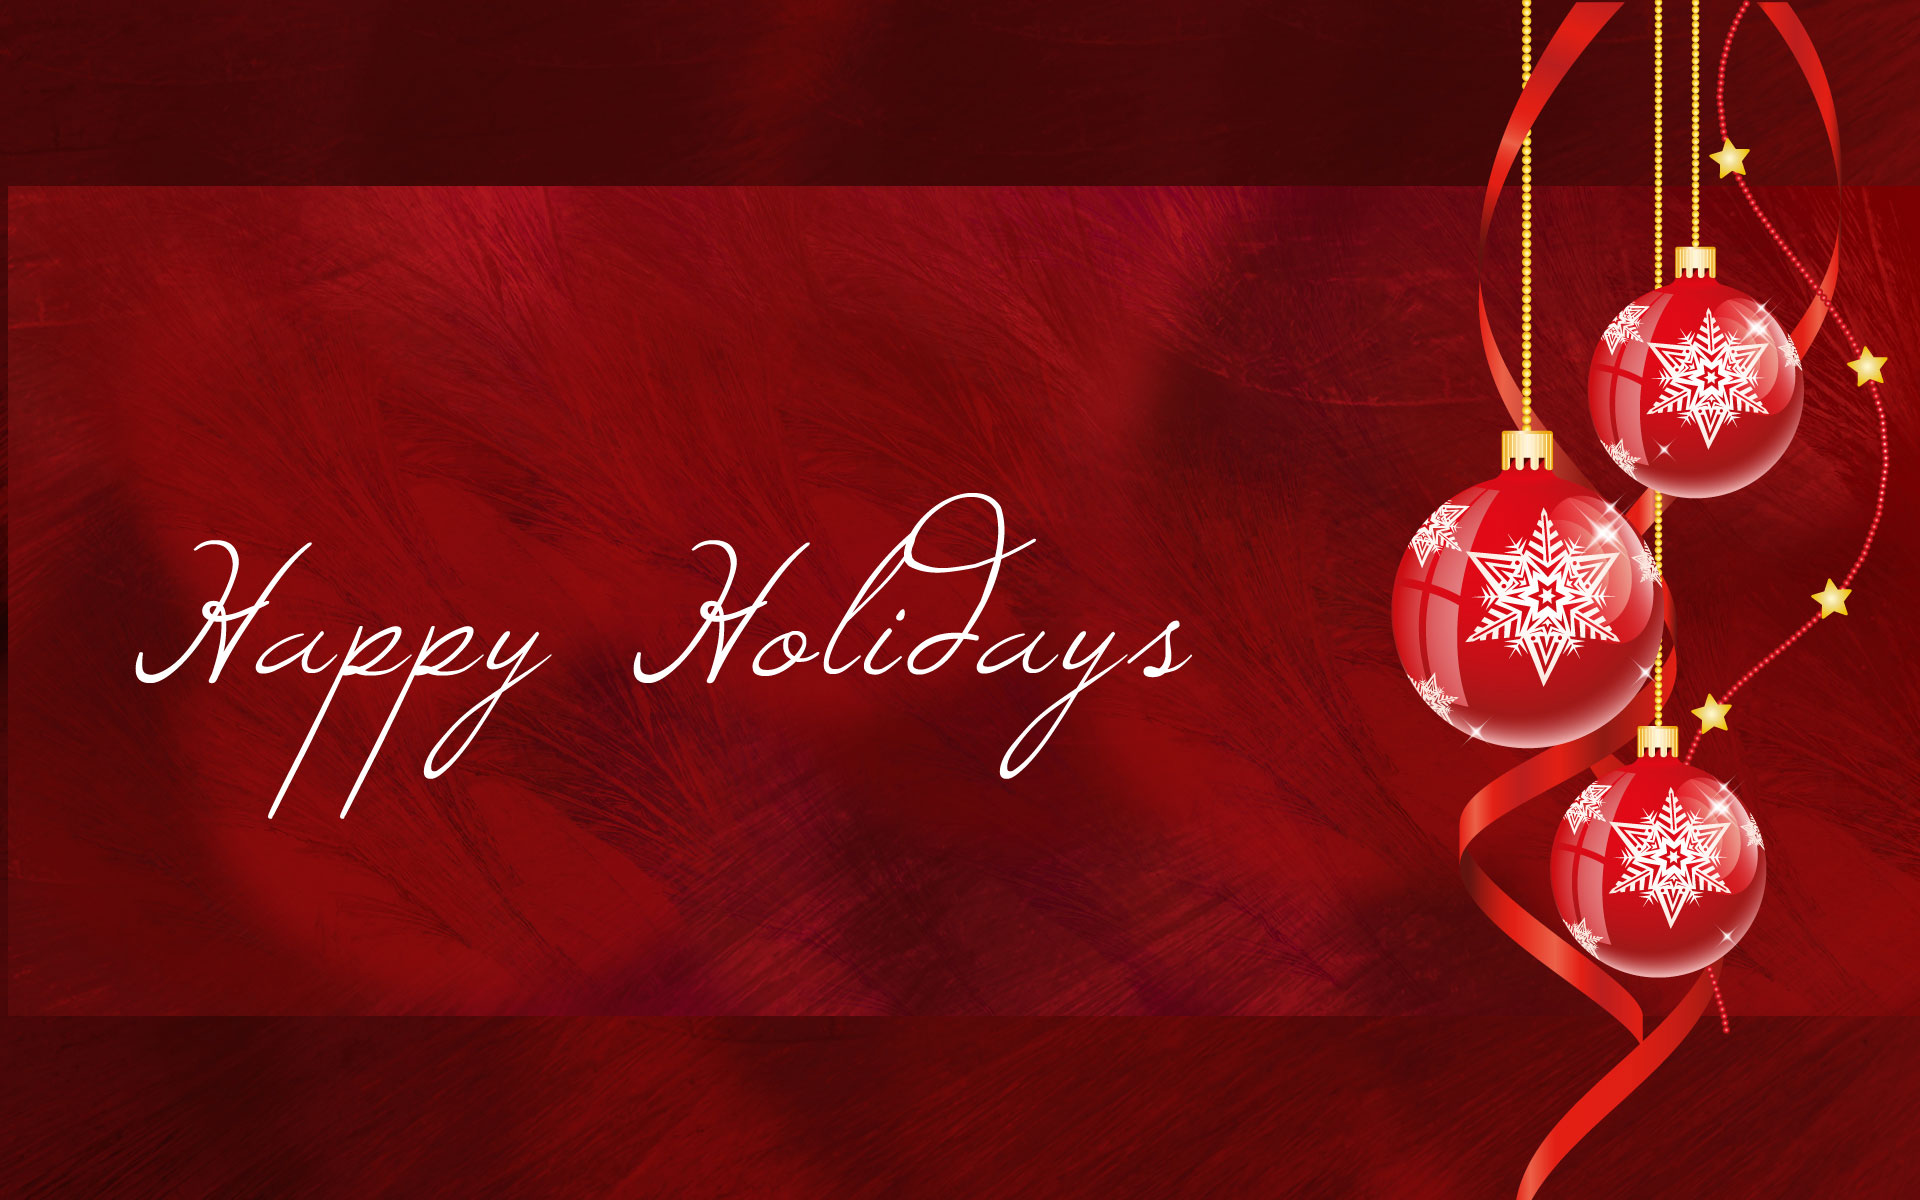 Holiday Background Wallpaper Adorable HDq Of